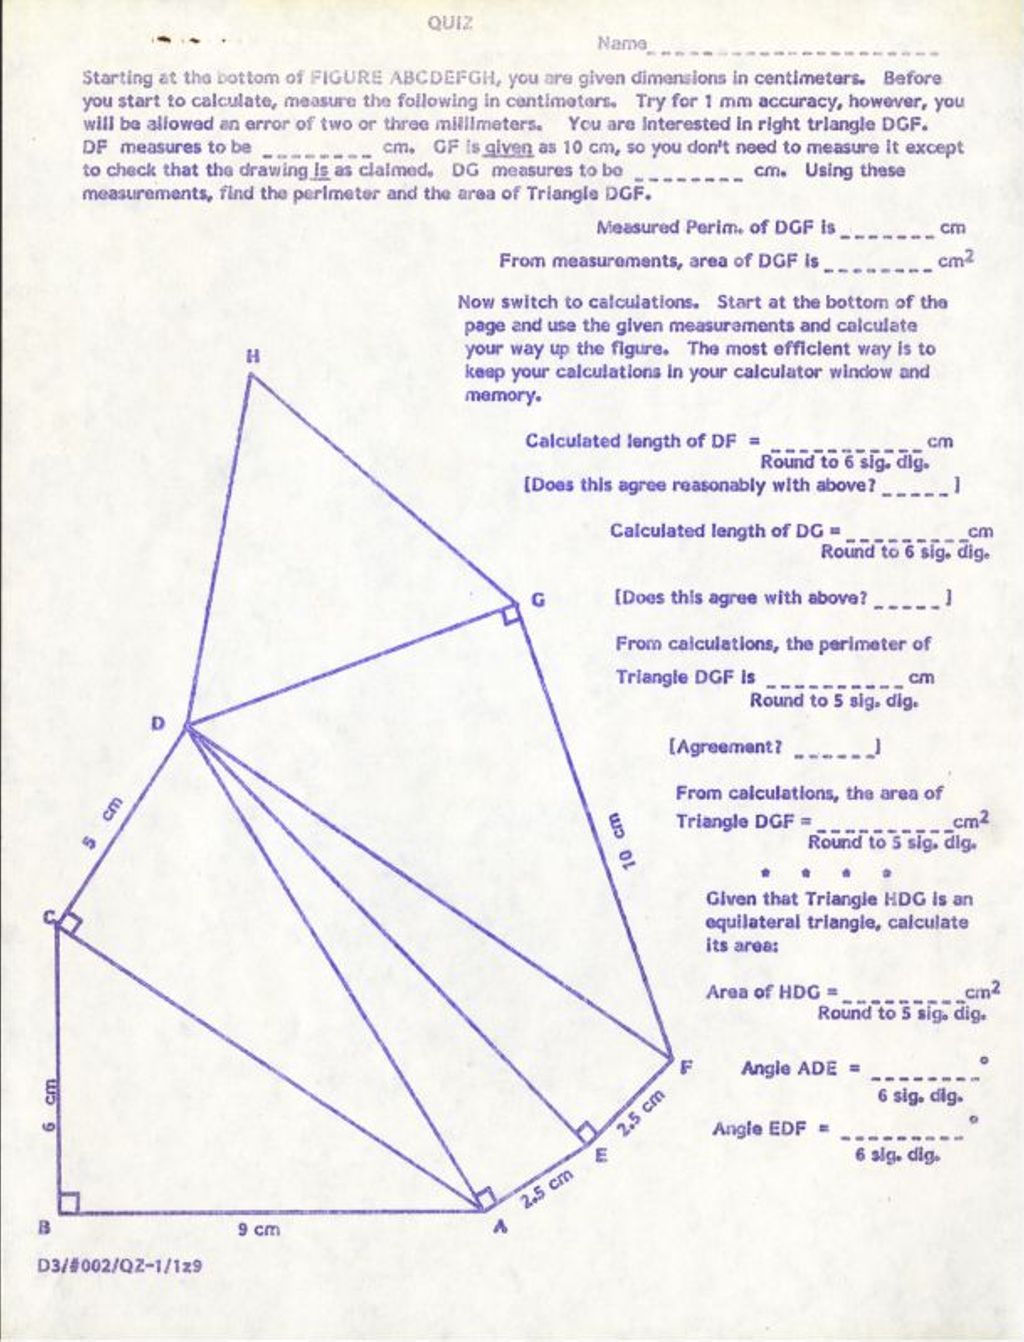 Miniature of Quiz (Triangles put together) Five right triangles and an equilateral triangle